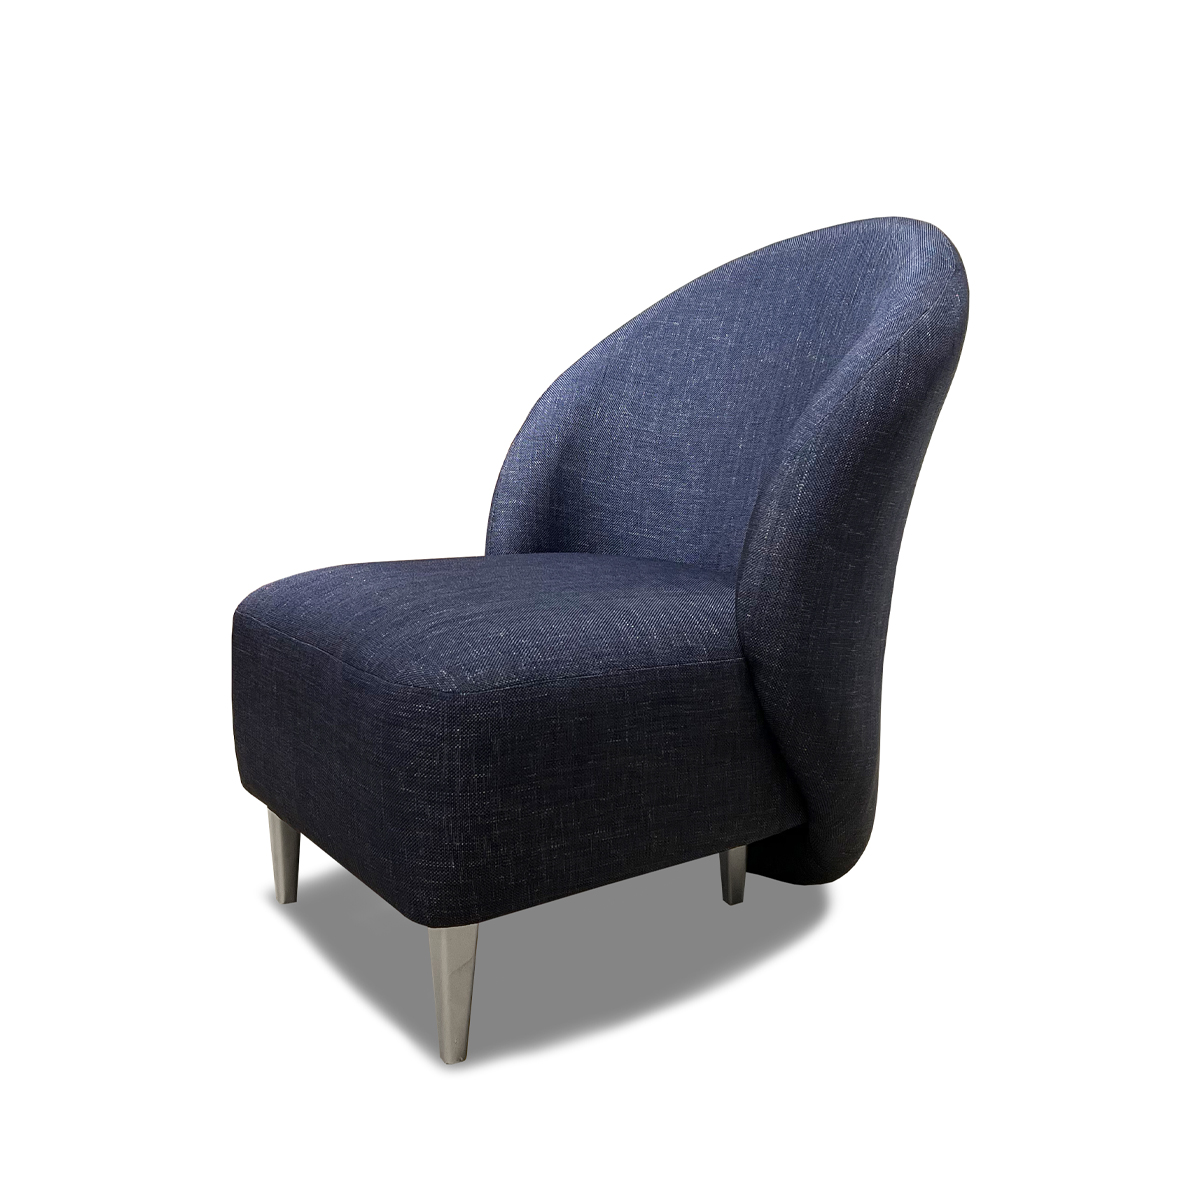 Rounded design armchair